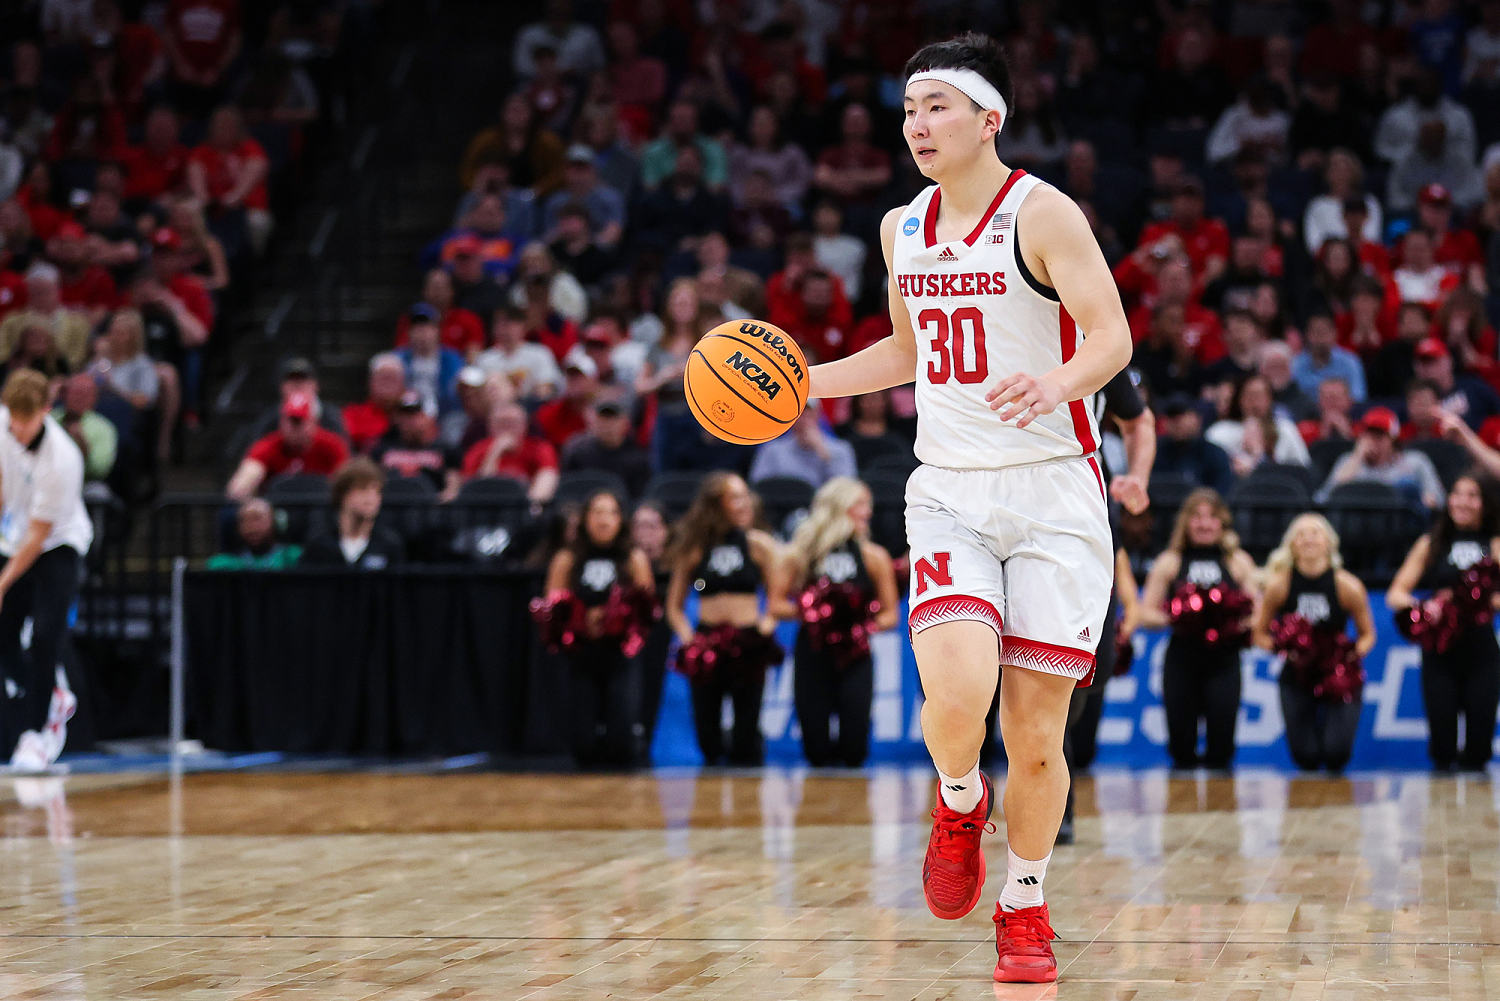 Nebraska guard says vulnerability in sports should be 'celebrated' after viral crying moment